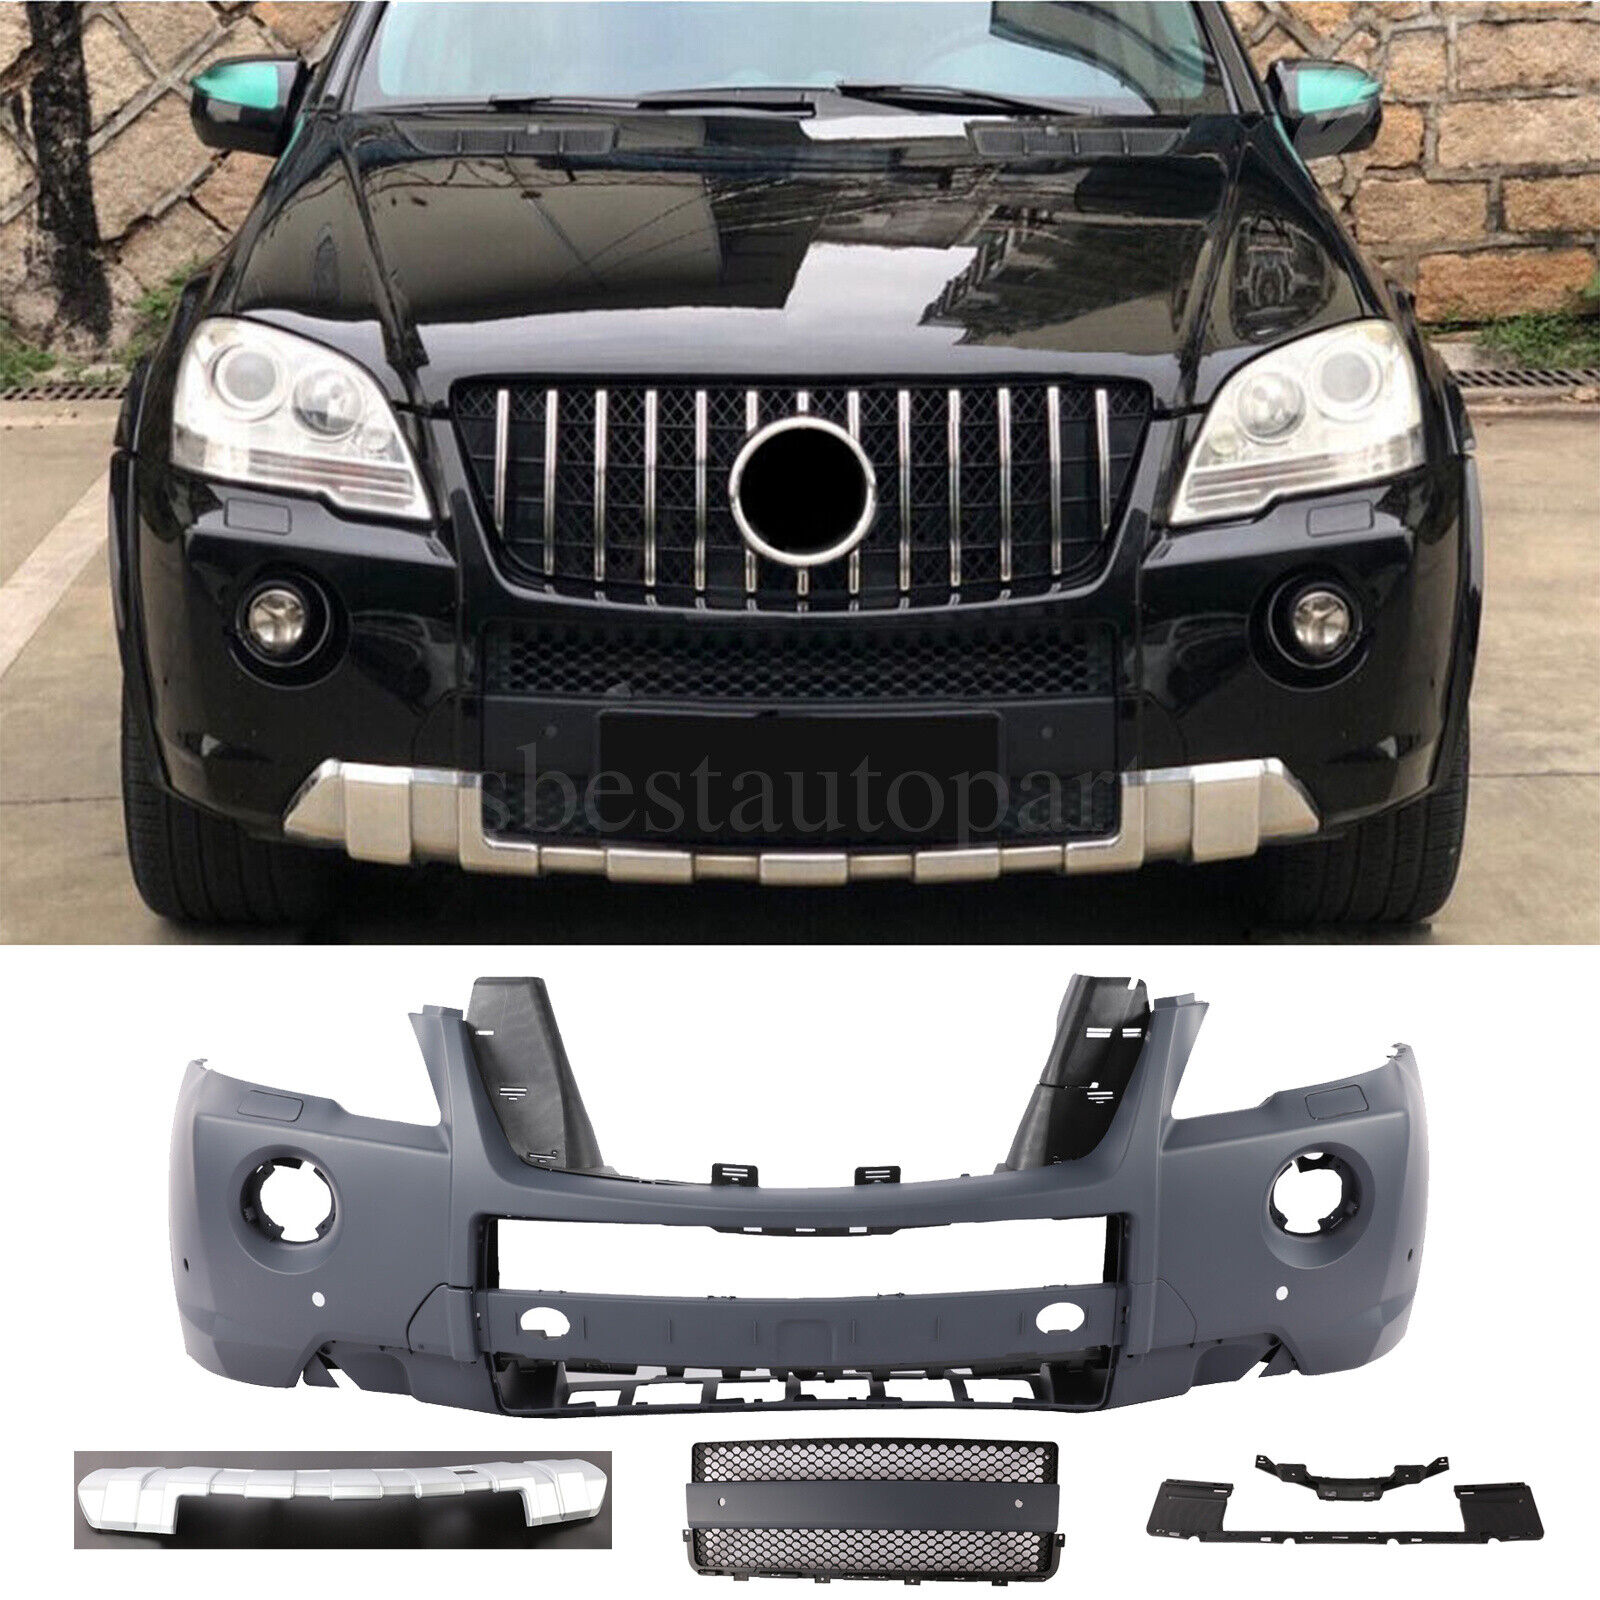 ML63 AMG Style Front Bumper For 09-11 Mercedes Benz W164 ML350 ML500 ML550